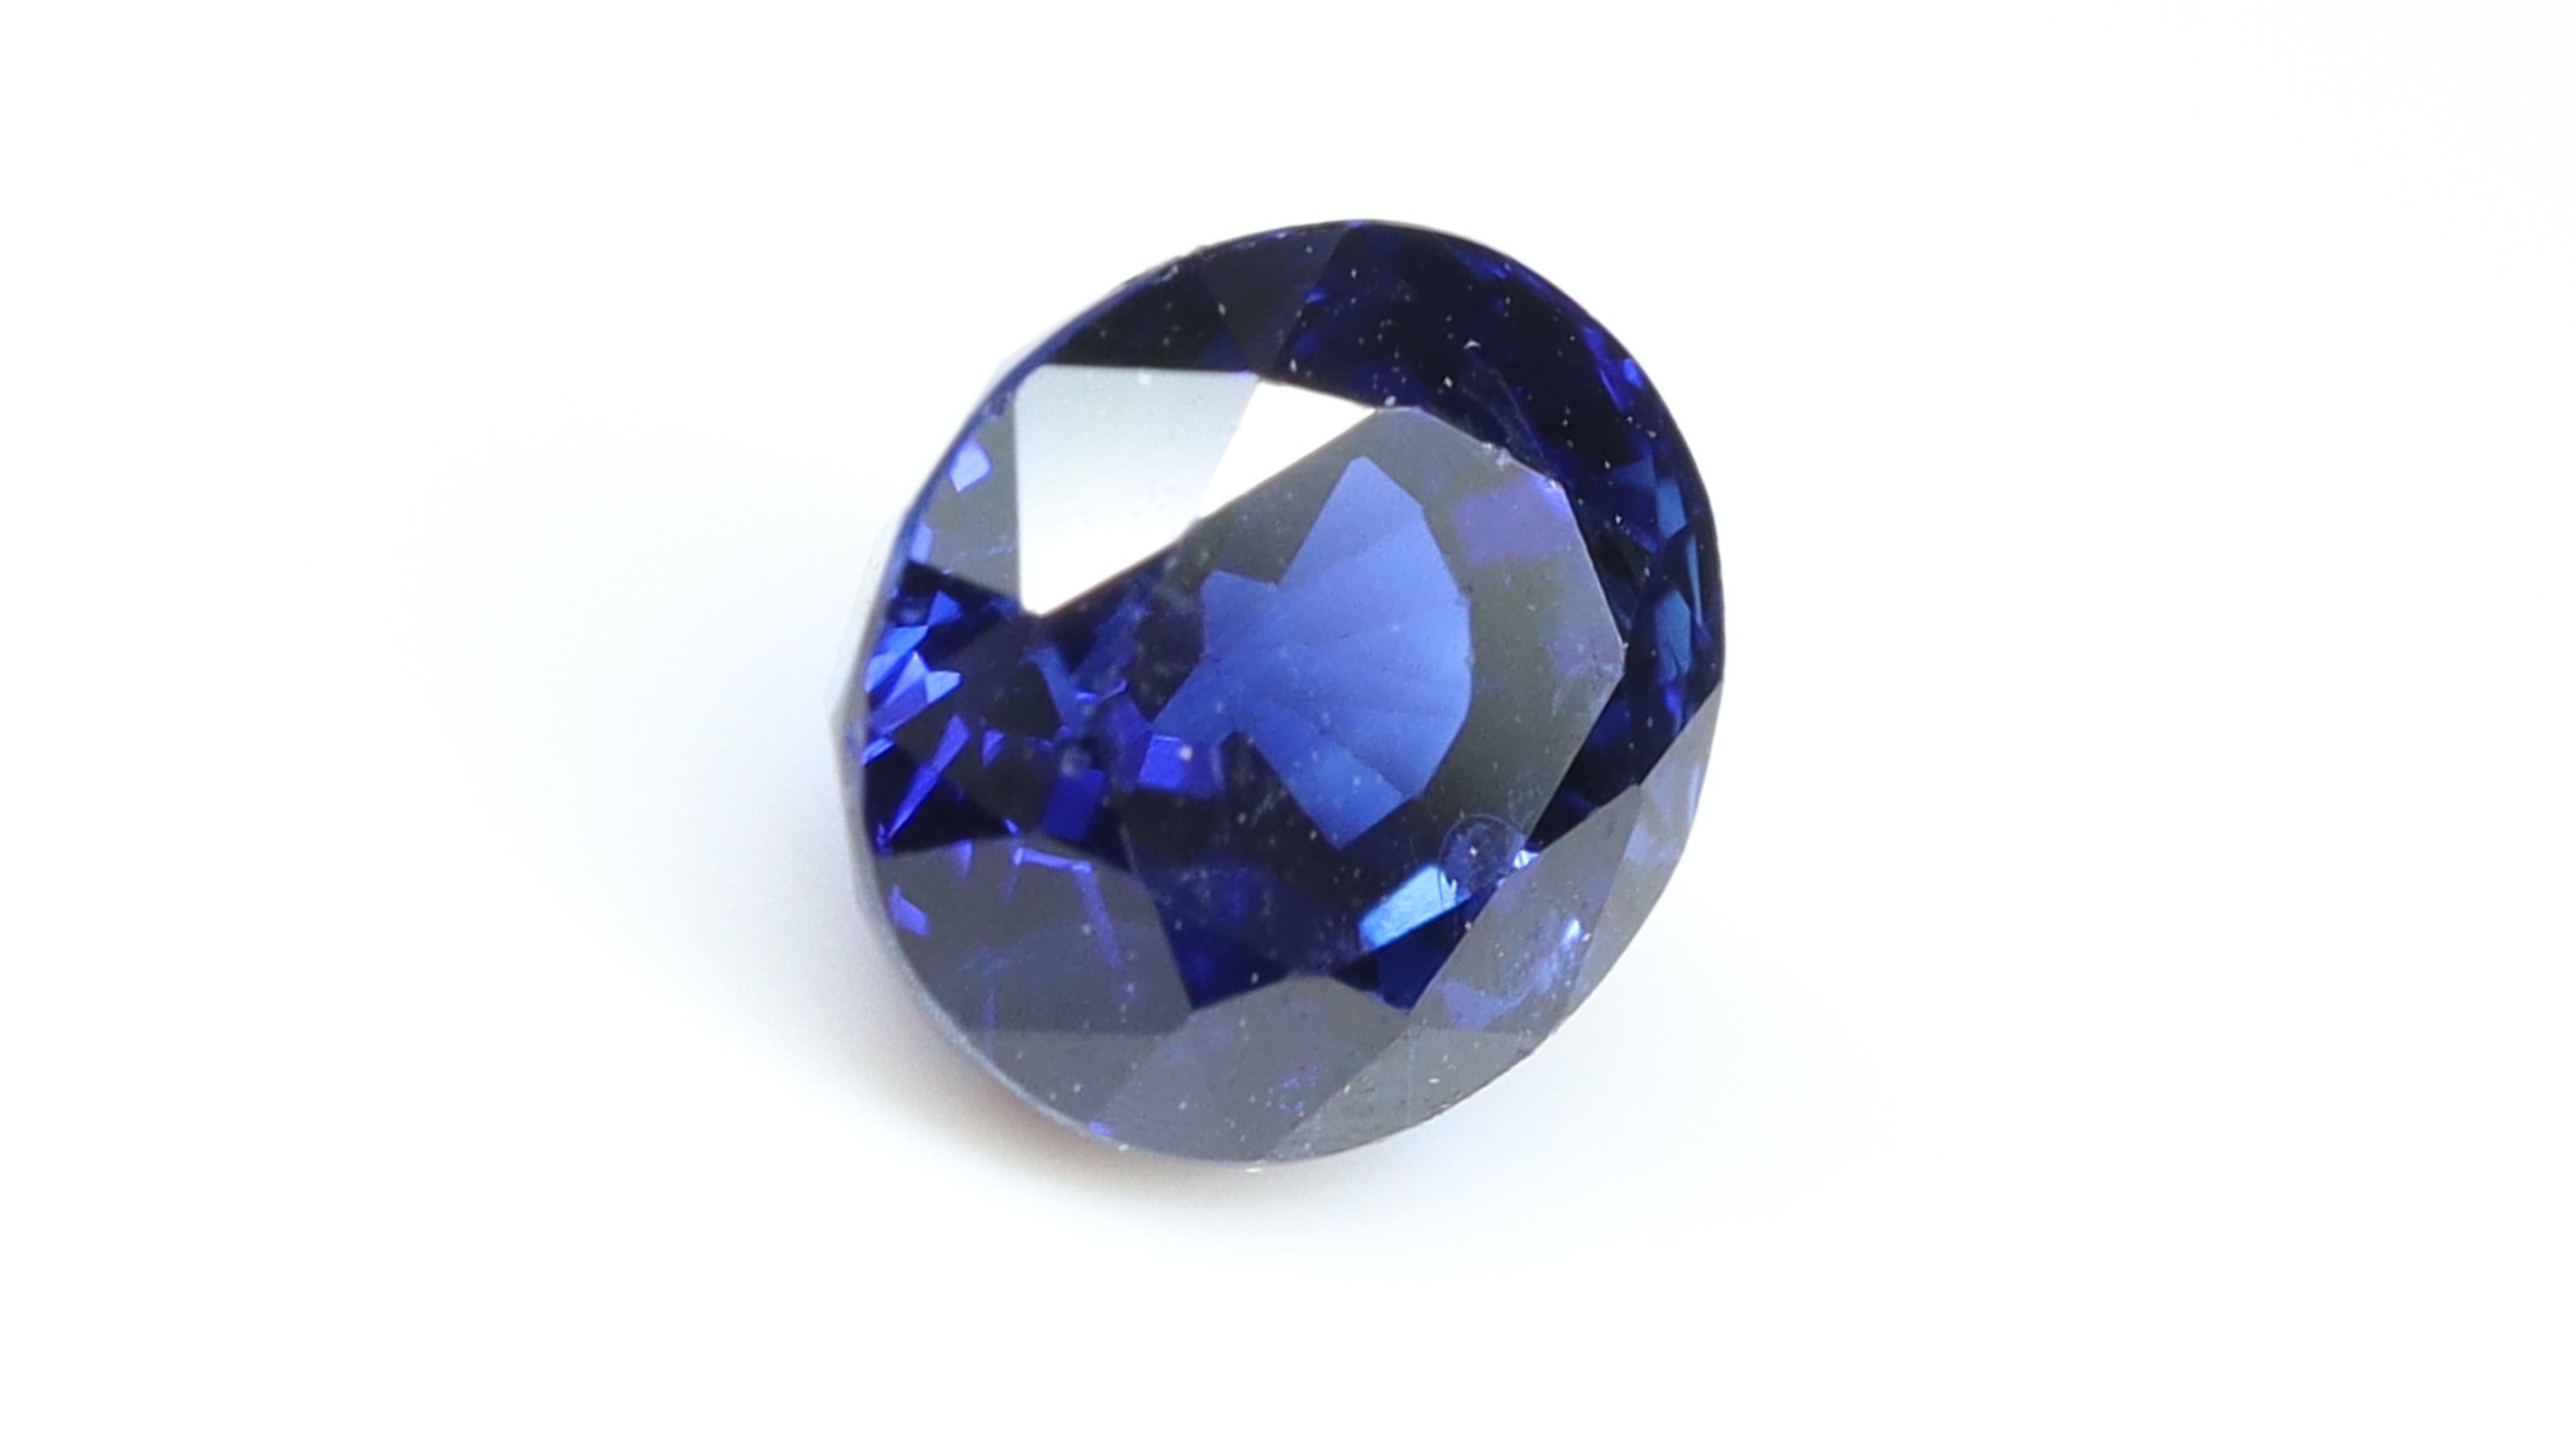 Sapphires, like Rubies, are a variation from the mineral species corundum, composed of aluminum and oxygen. It is a fascinating gemstone mined in Australia, Burma, Cambodia, Sri Lanka, Madagascar, etc. with distinct features, color saturation; and